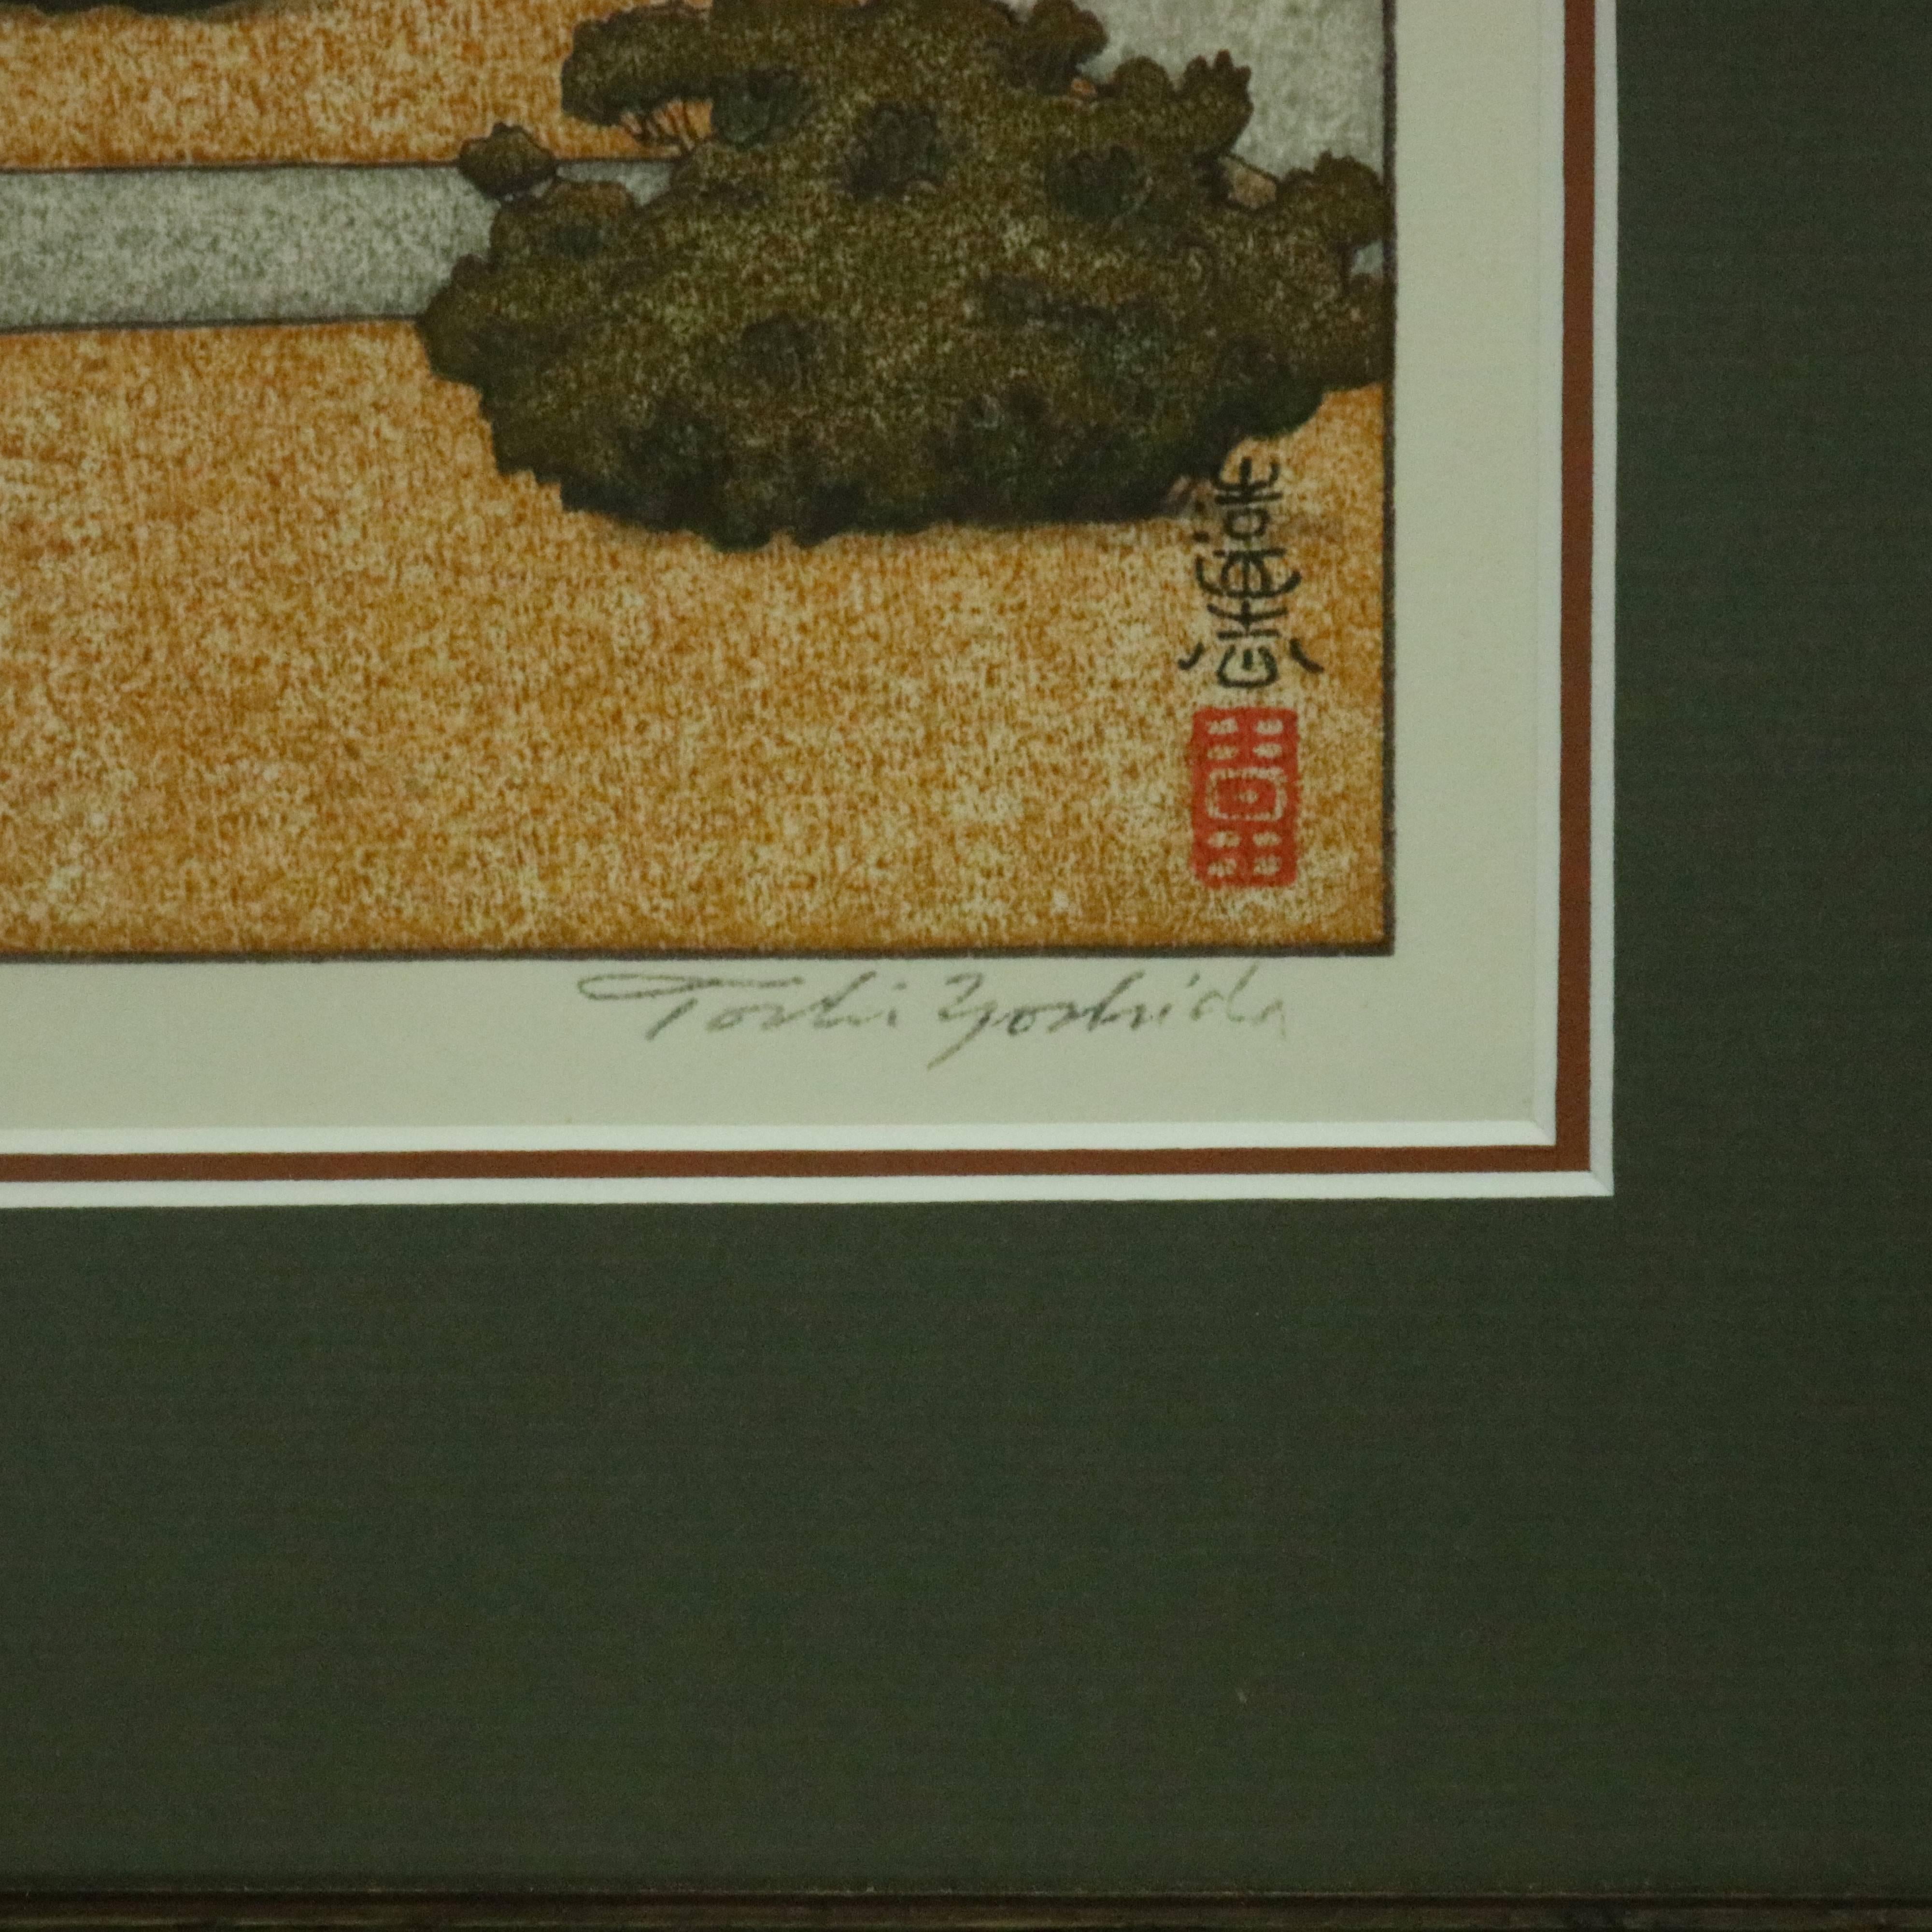 Vintage Japanese colored wood block print by listed artist Toshi Yoshida titled lower center "Autumn in Hakone Museum", signed lower left, circa 1930

Measures: 21.25" H x 15.25" W x 1.5' D framed; 15" H x 10" W

Toshi